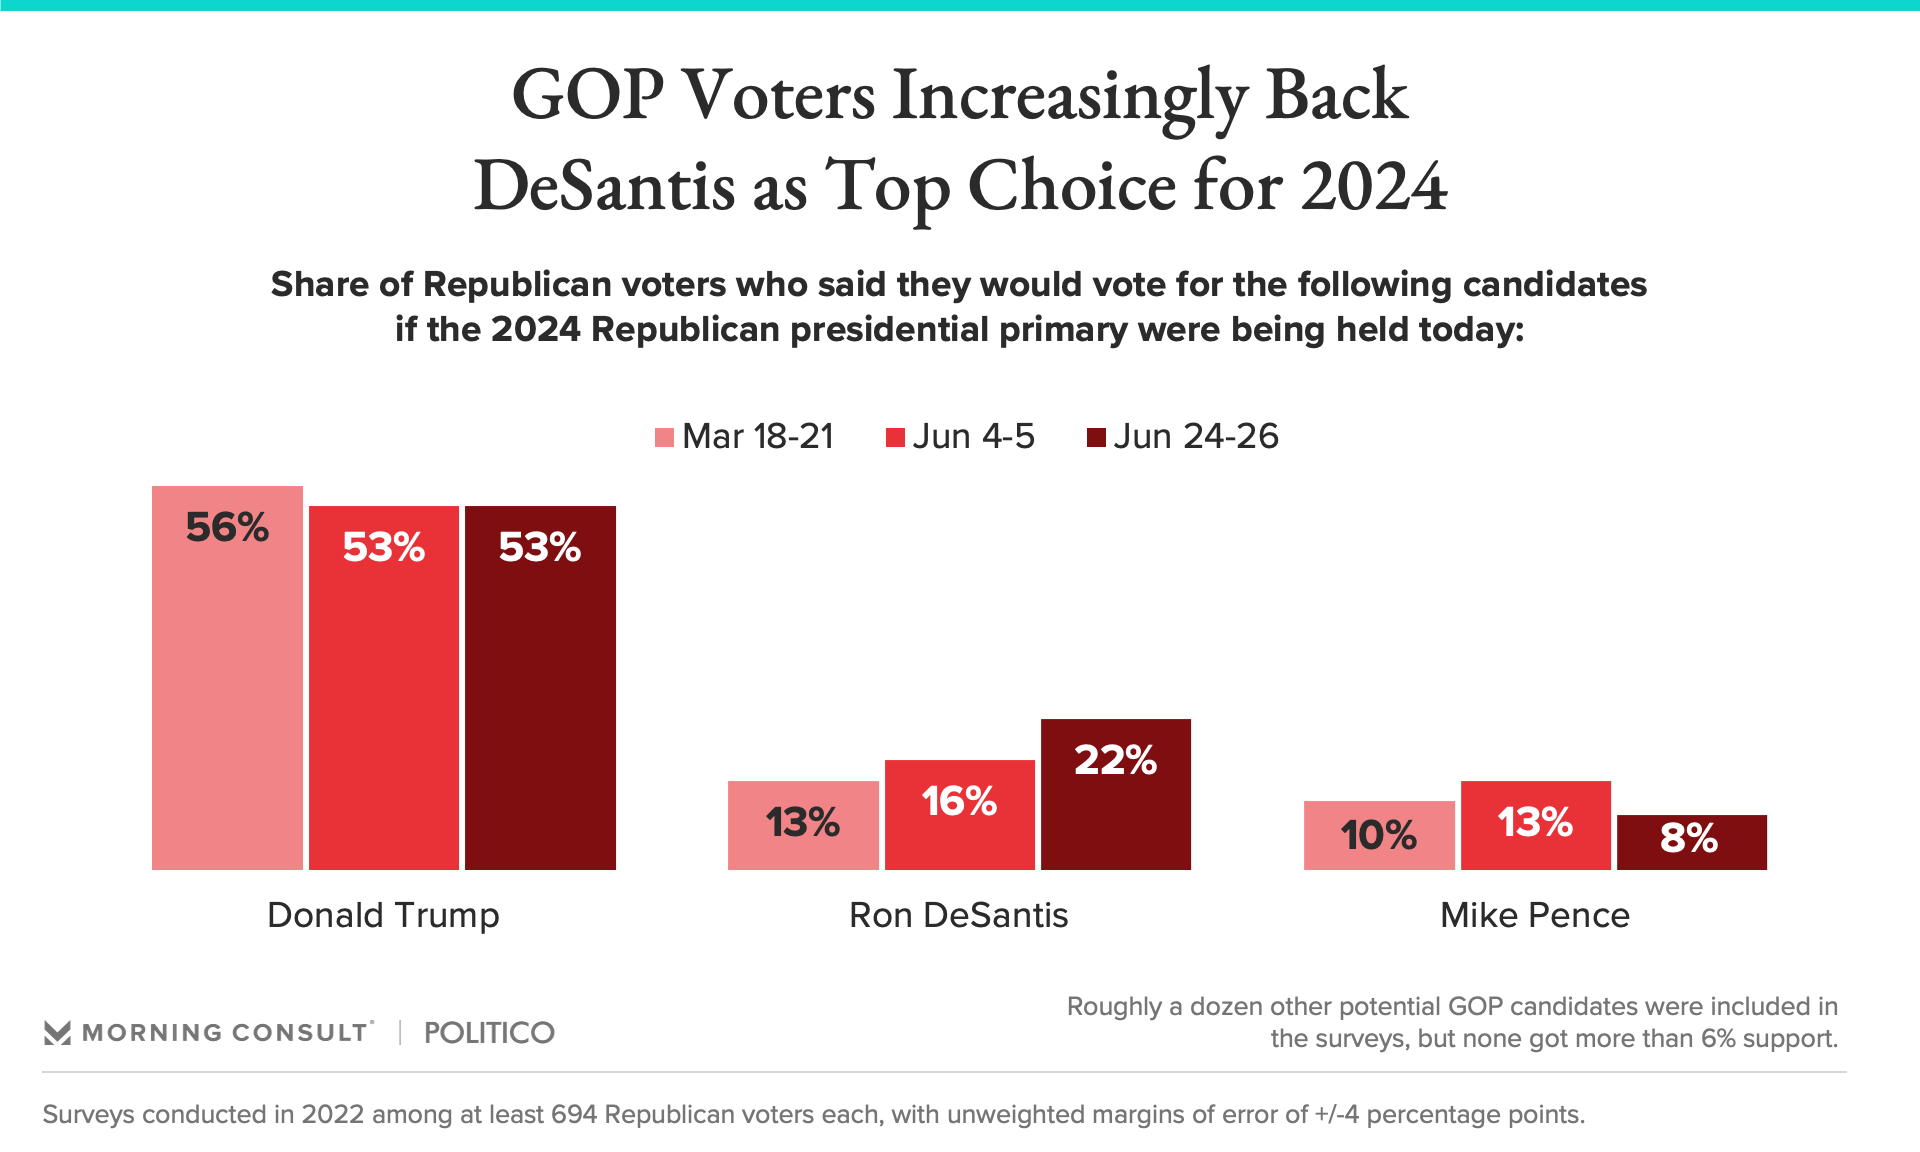 Voters increasingly back DeSantis as top choice for 2024